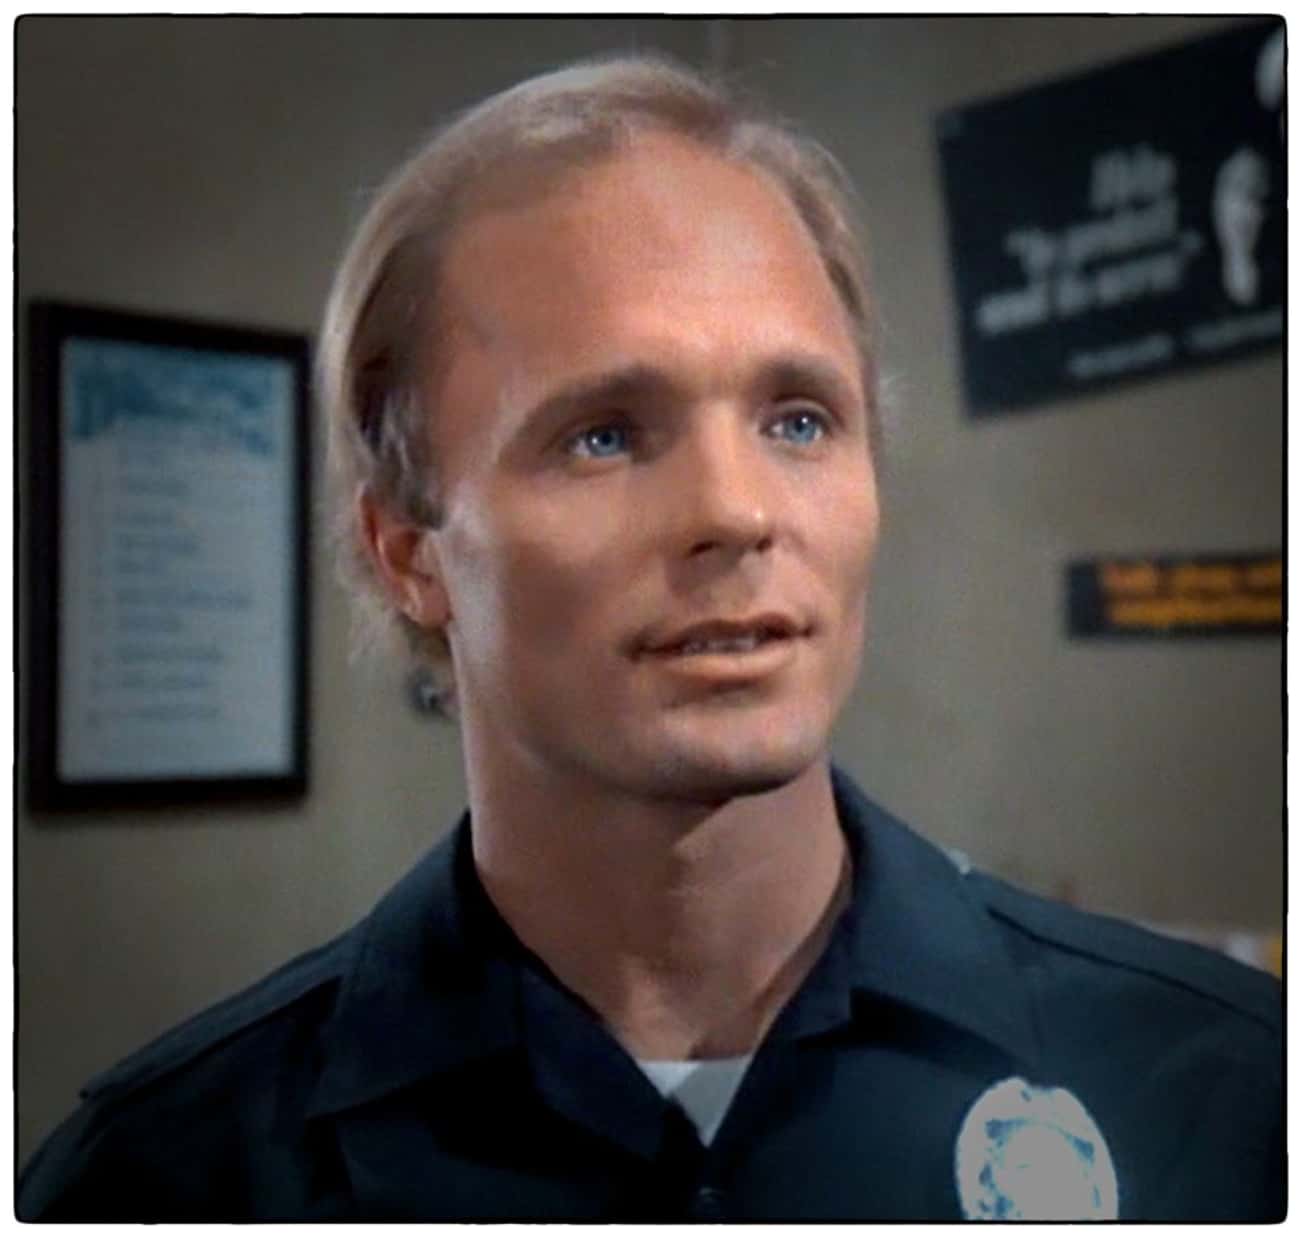 Young Ed Harris in Police Uniform